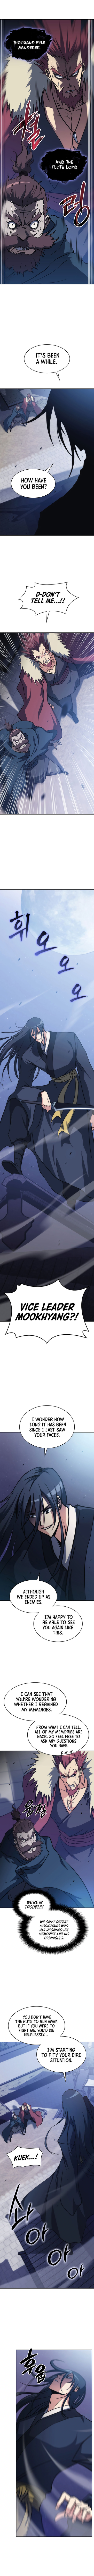 MookHyang - The Origin - Chapter 39 Page 3